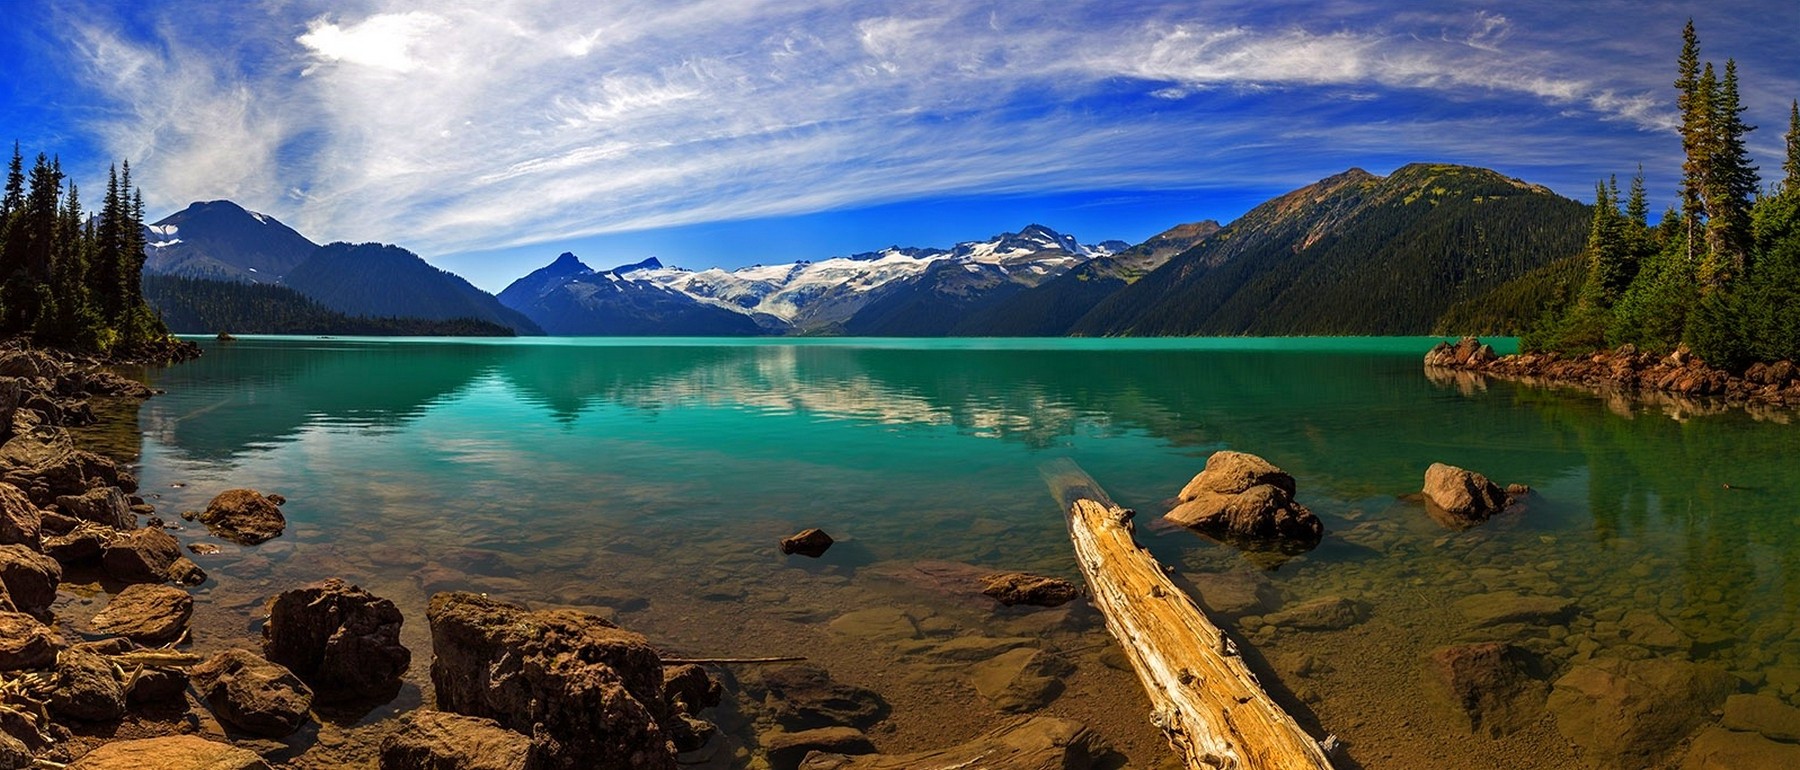 lake, British Columbia, Canada, Mountain, Forest, Clouds, Turquoise, Snowy Peak, Summer, Nature, Blue, White, Panoramas, Water, Landscape Wallpaper